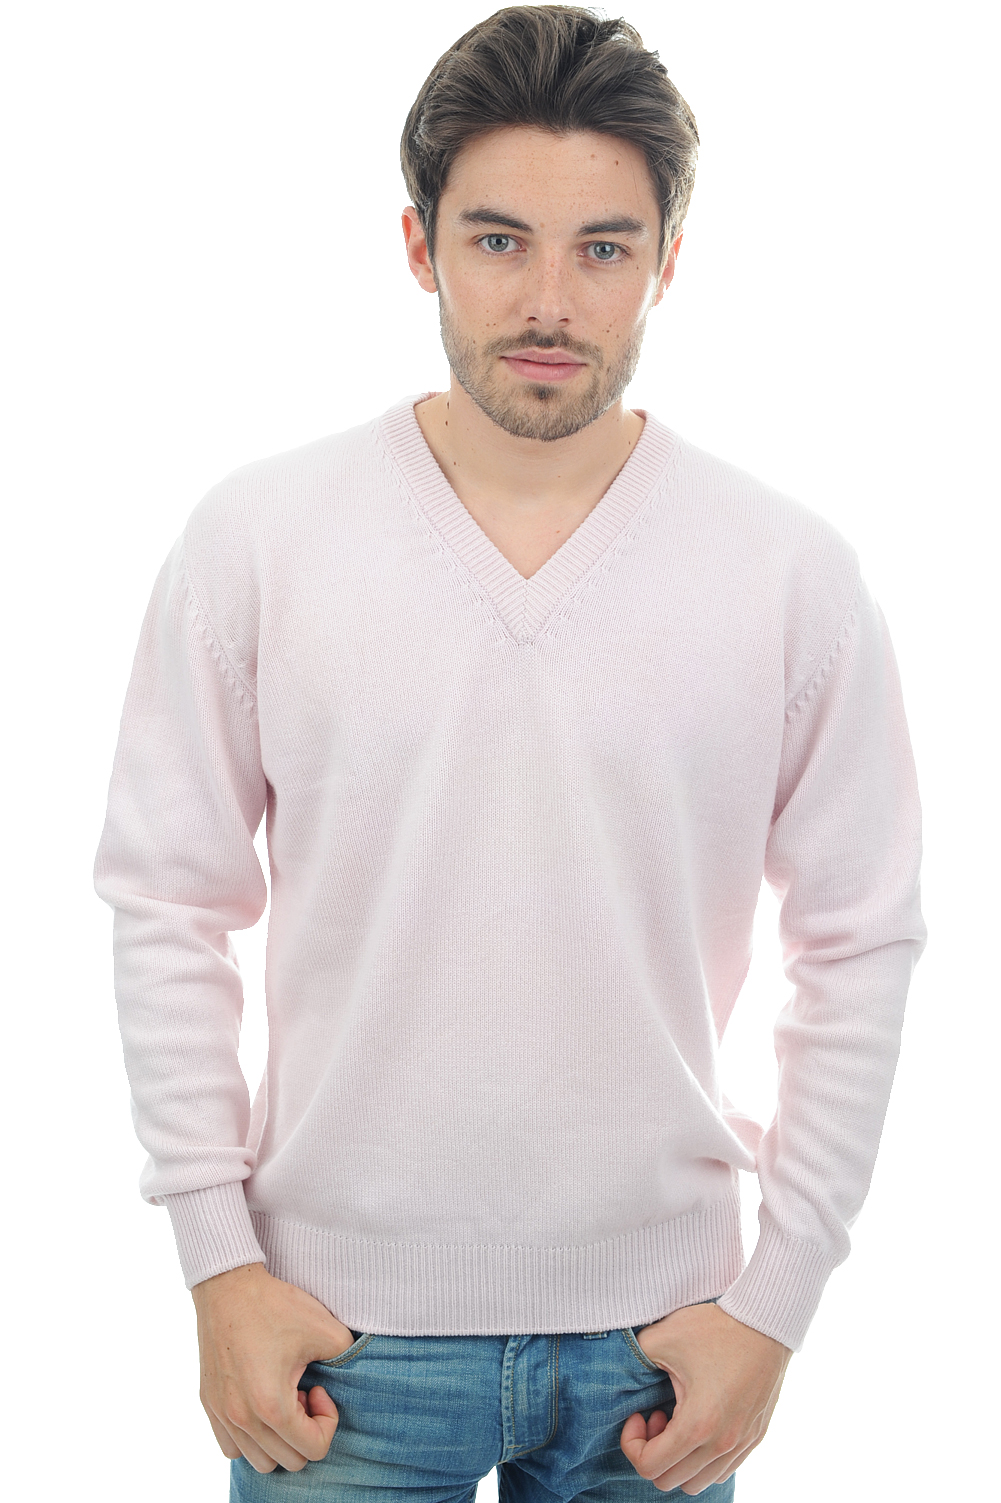 Cachemire pull homme hippolyte 4f rose pale 3xl